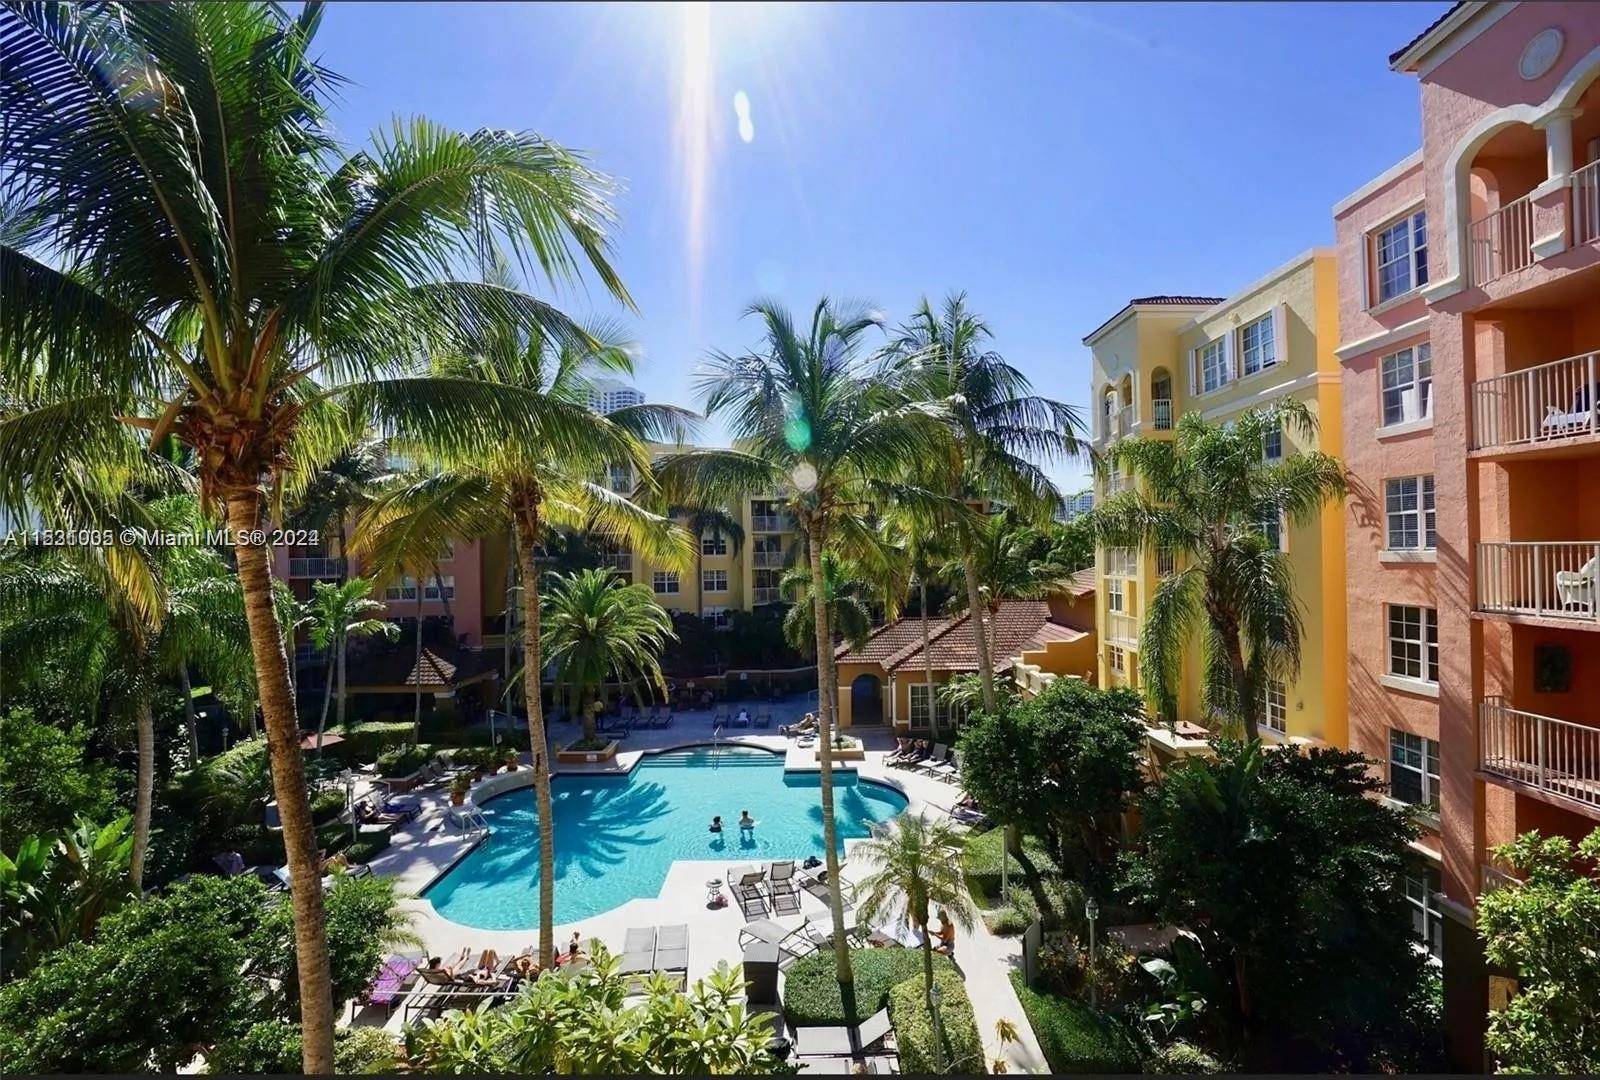 BEAUTIFUL 3 BEDROOMS 2 BATHROOMS SOPHISTICATEDLY FURNISHED UNIT AT DESIRABLE YACHT CLUB AT AVENTURA, CLOSE TO EXCELLENT SCHOOLS, AVENTURA MALL, GULFSTREAM PARK, BRIGHTLINE.